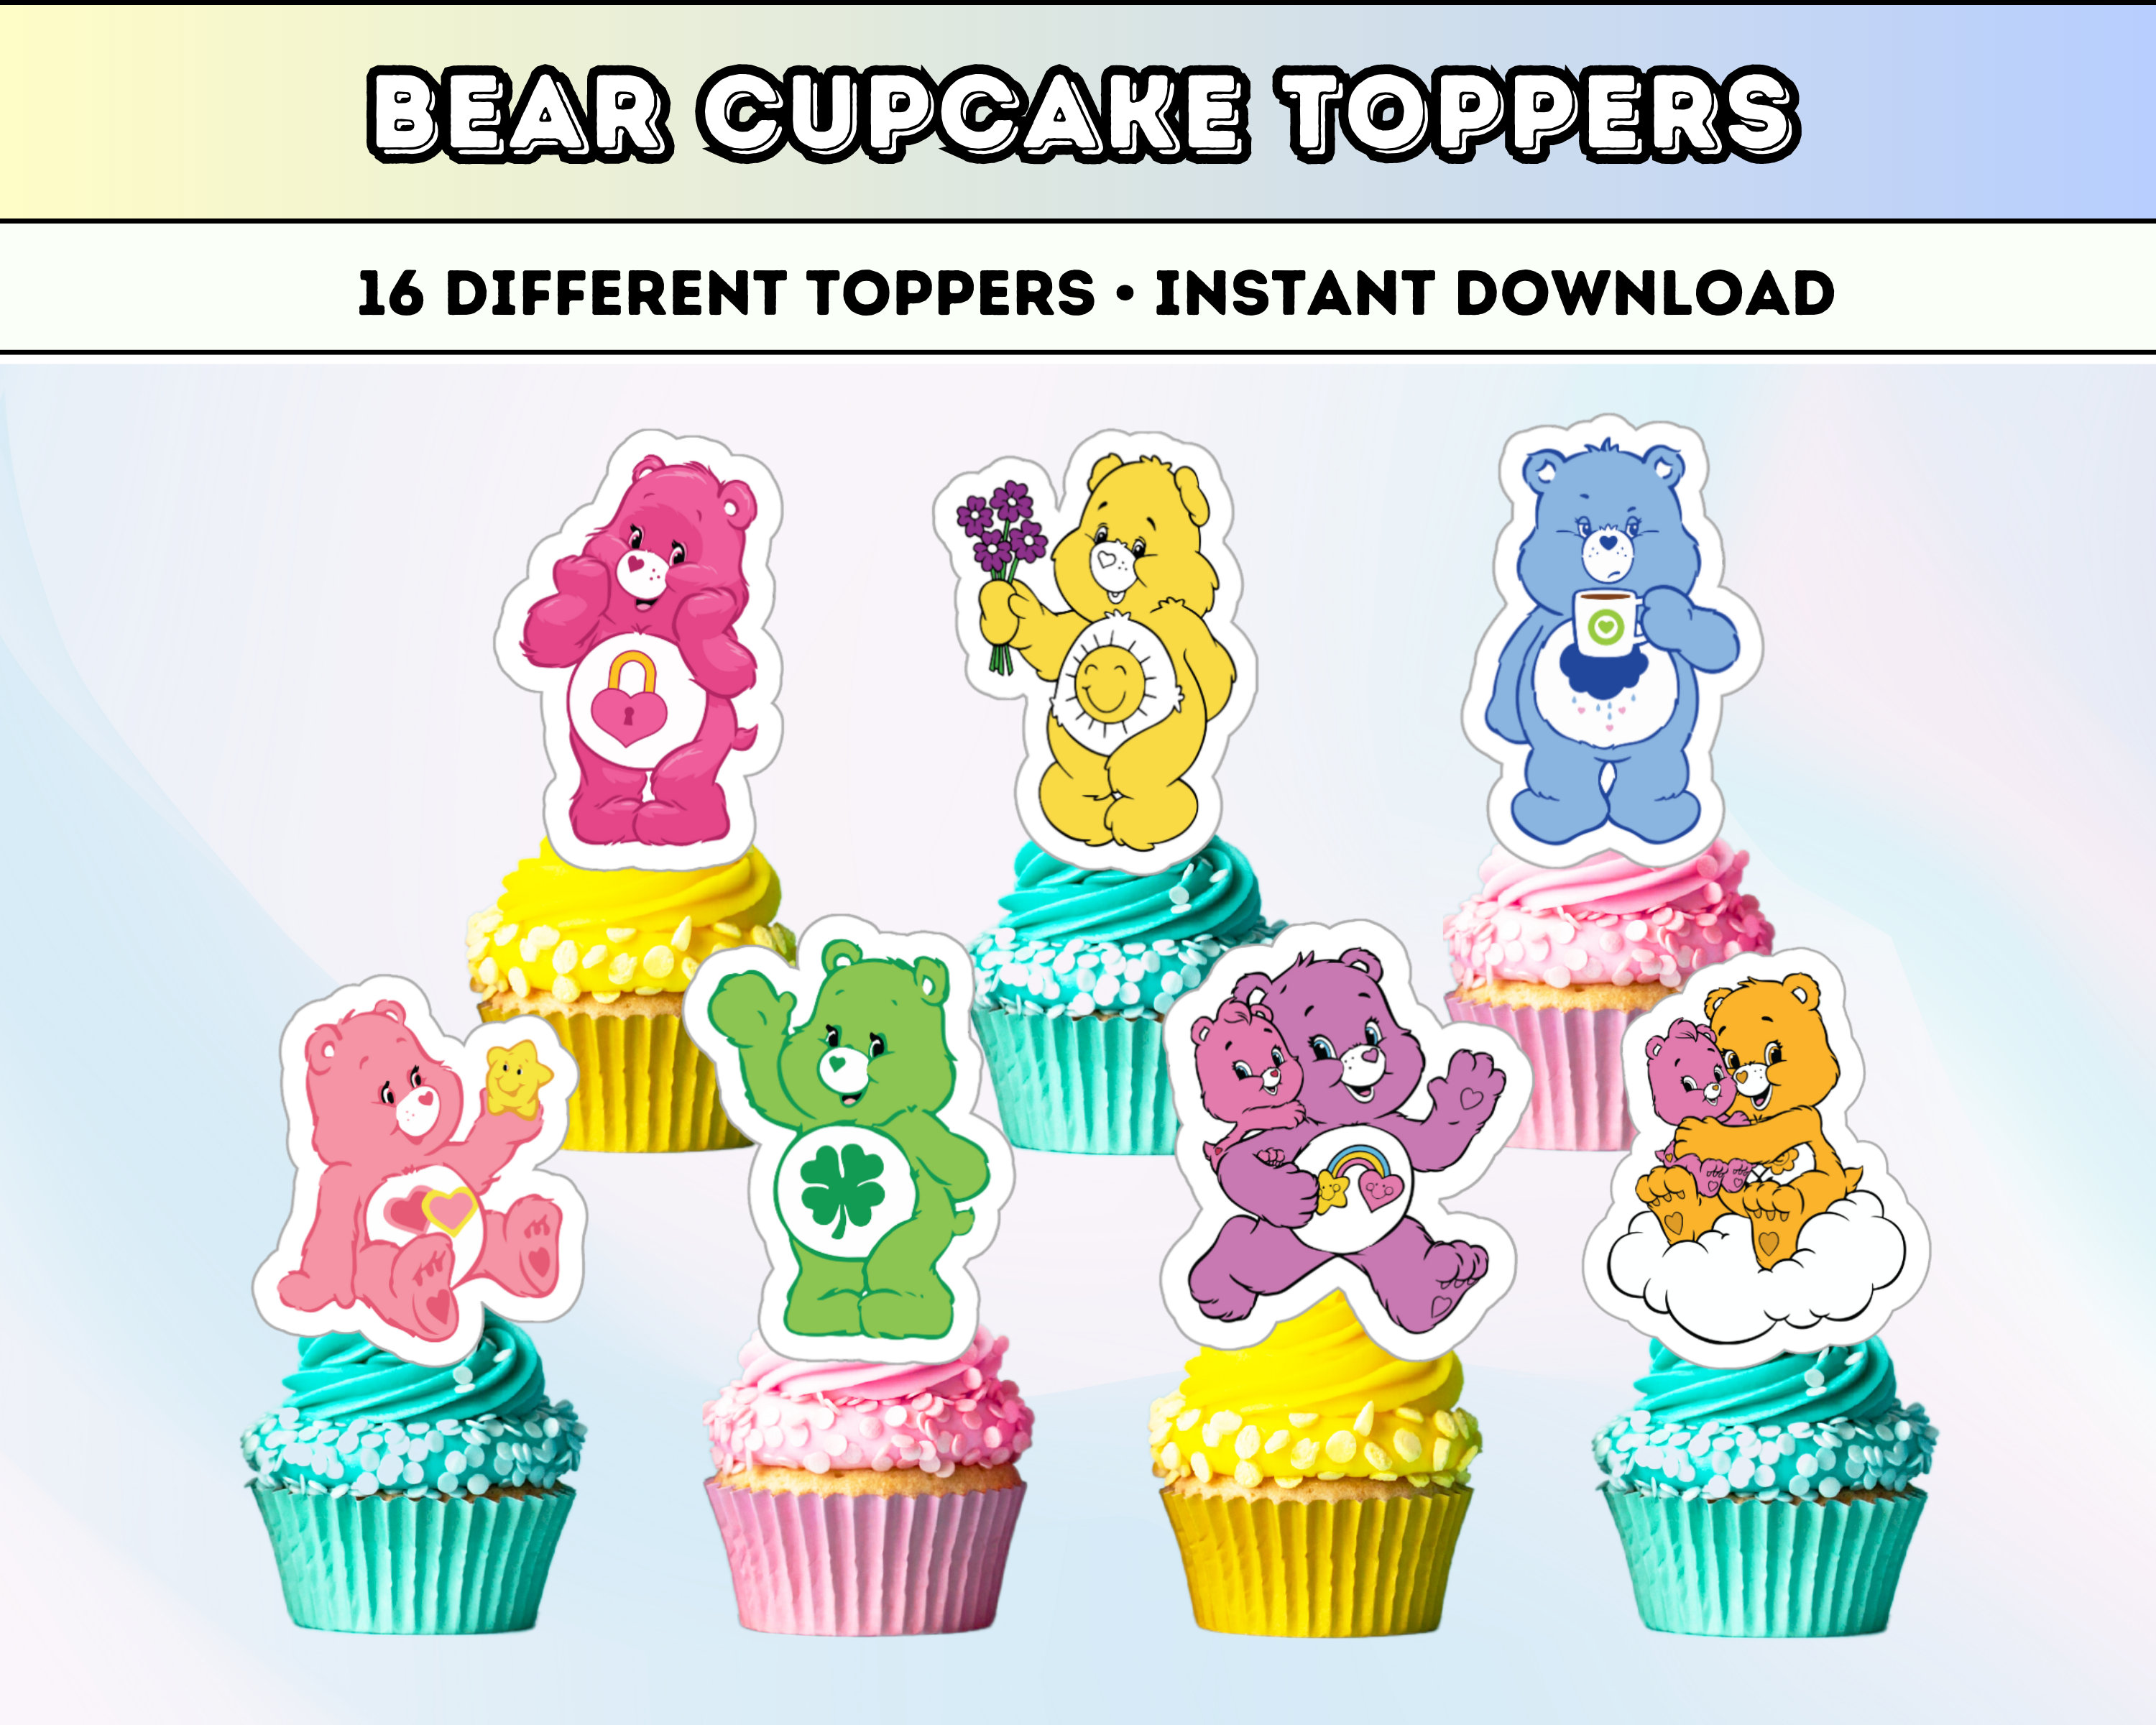 Care Bears Cupcake Topper Birthday Party Decorations Set of 12 Figures with  Share Bear, Wonderheart Bear, Grumpy Bear, Wish Bear and Many More! :  : Grocery